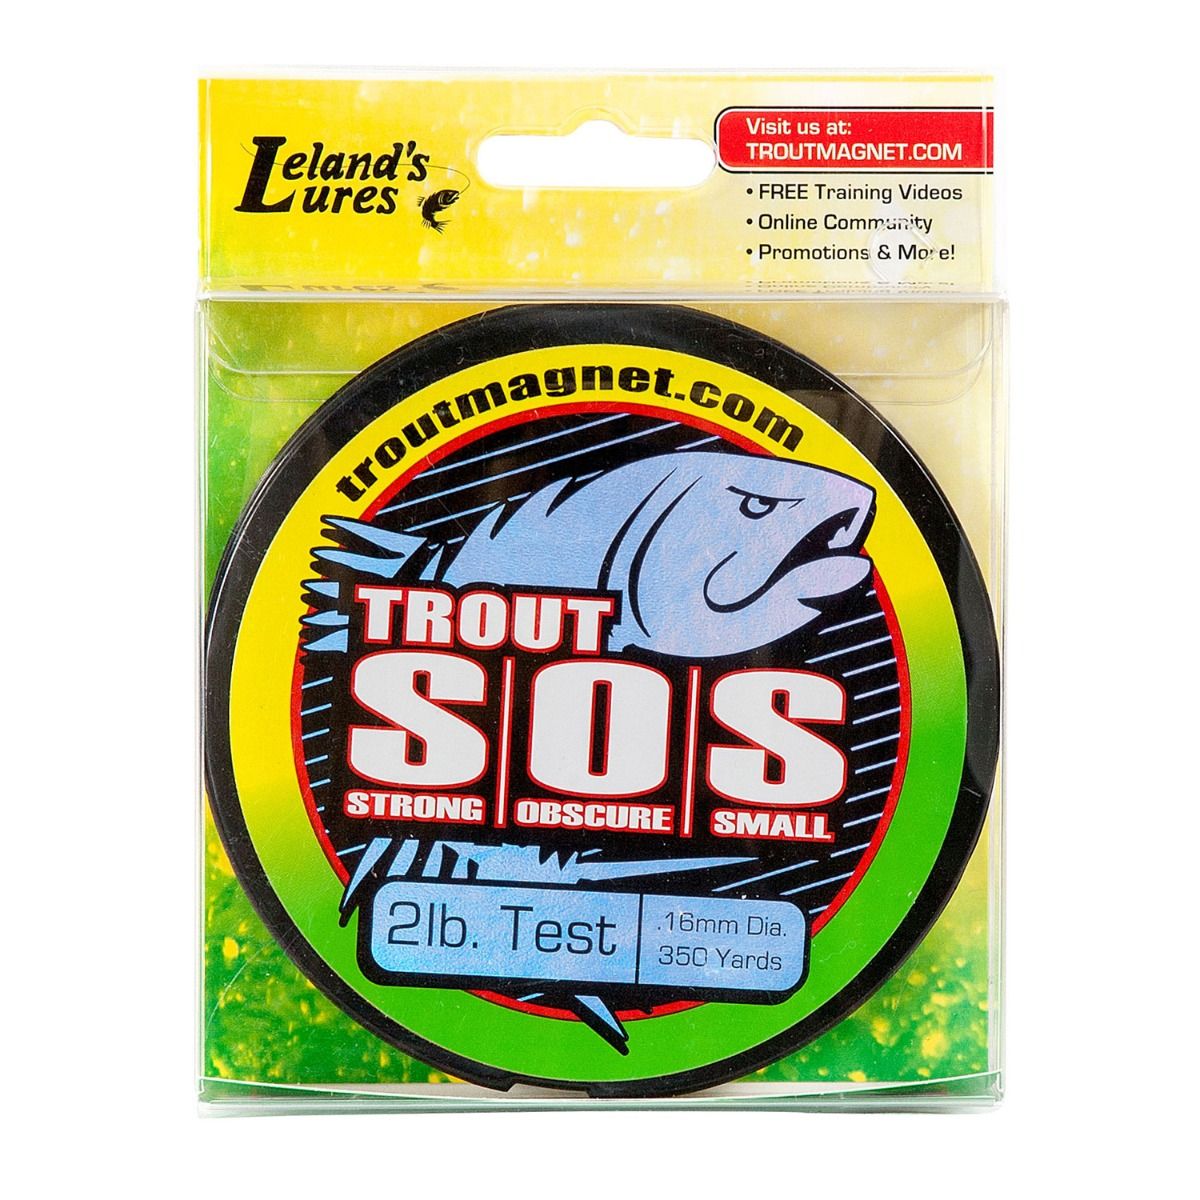 Trout S.O.S Line by Leland's Lures